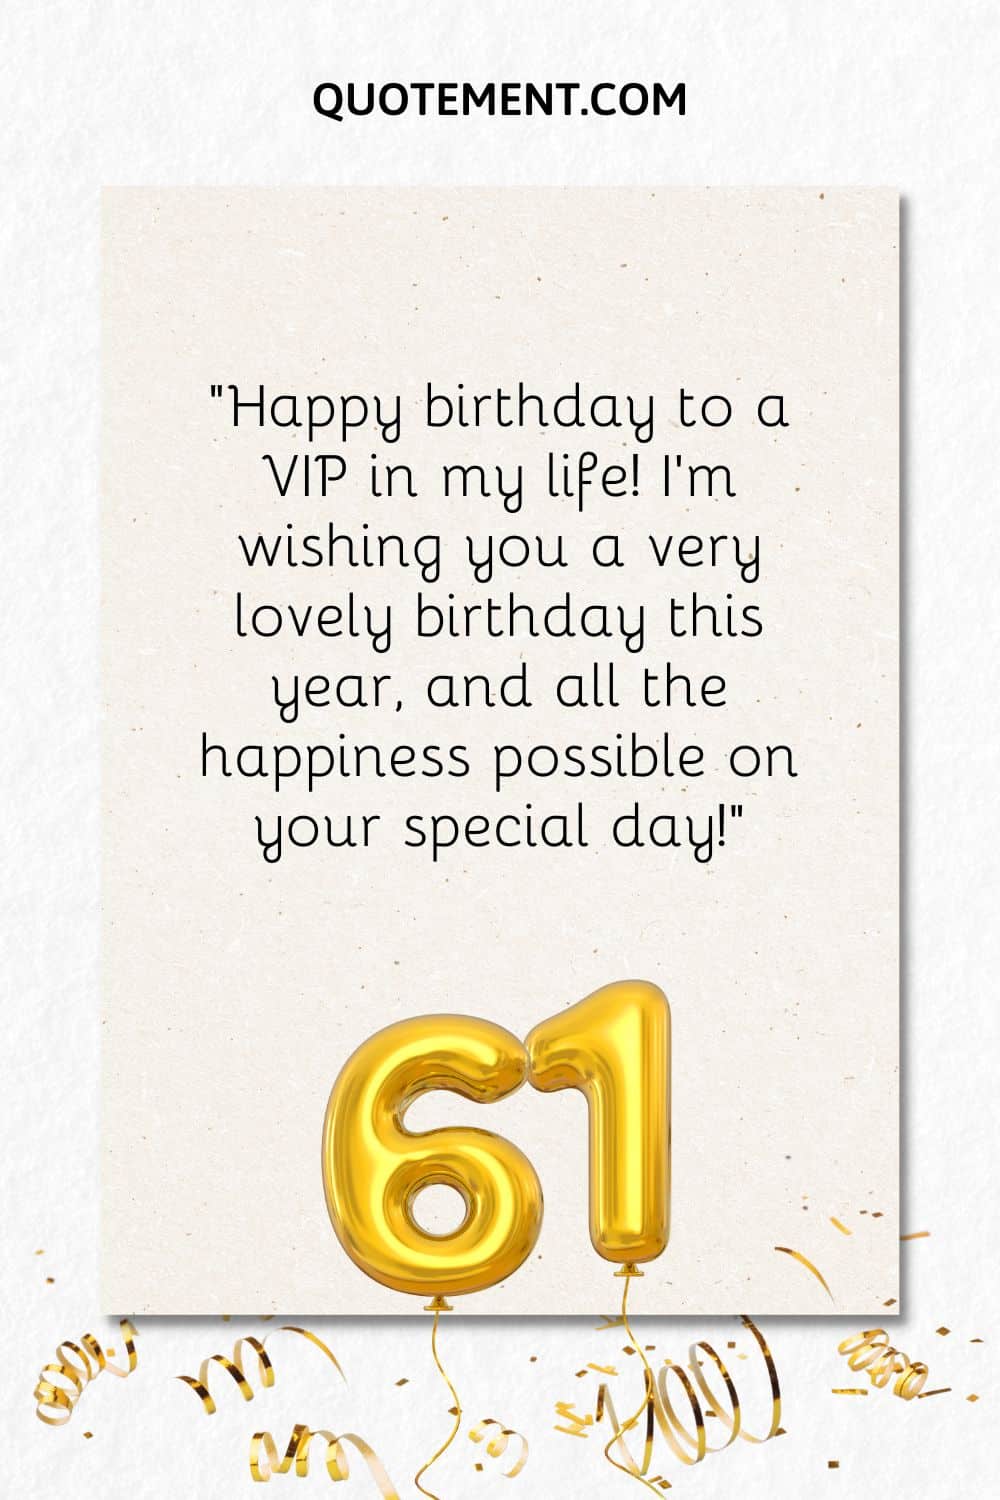 “Happy birthday to a VIP in my life! I’m wishing you a very lovely birthday this year, and all the happiness possible on your special day!”